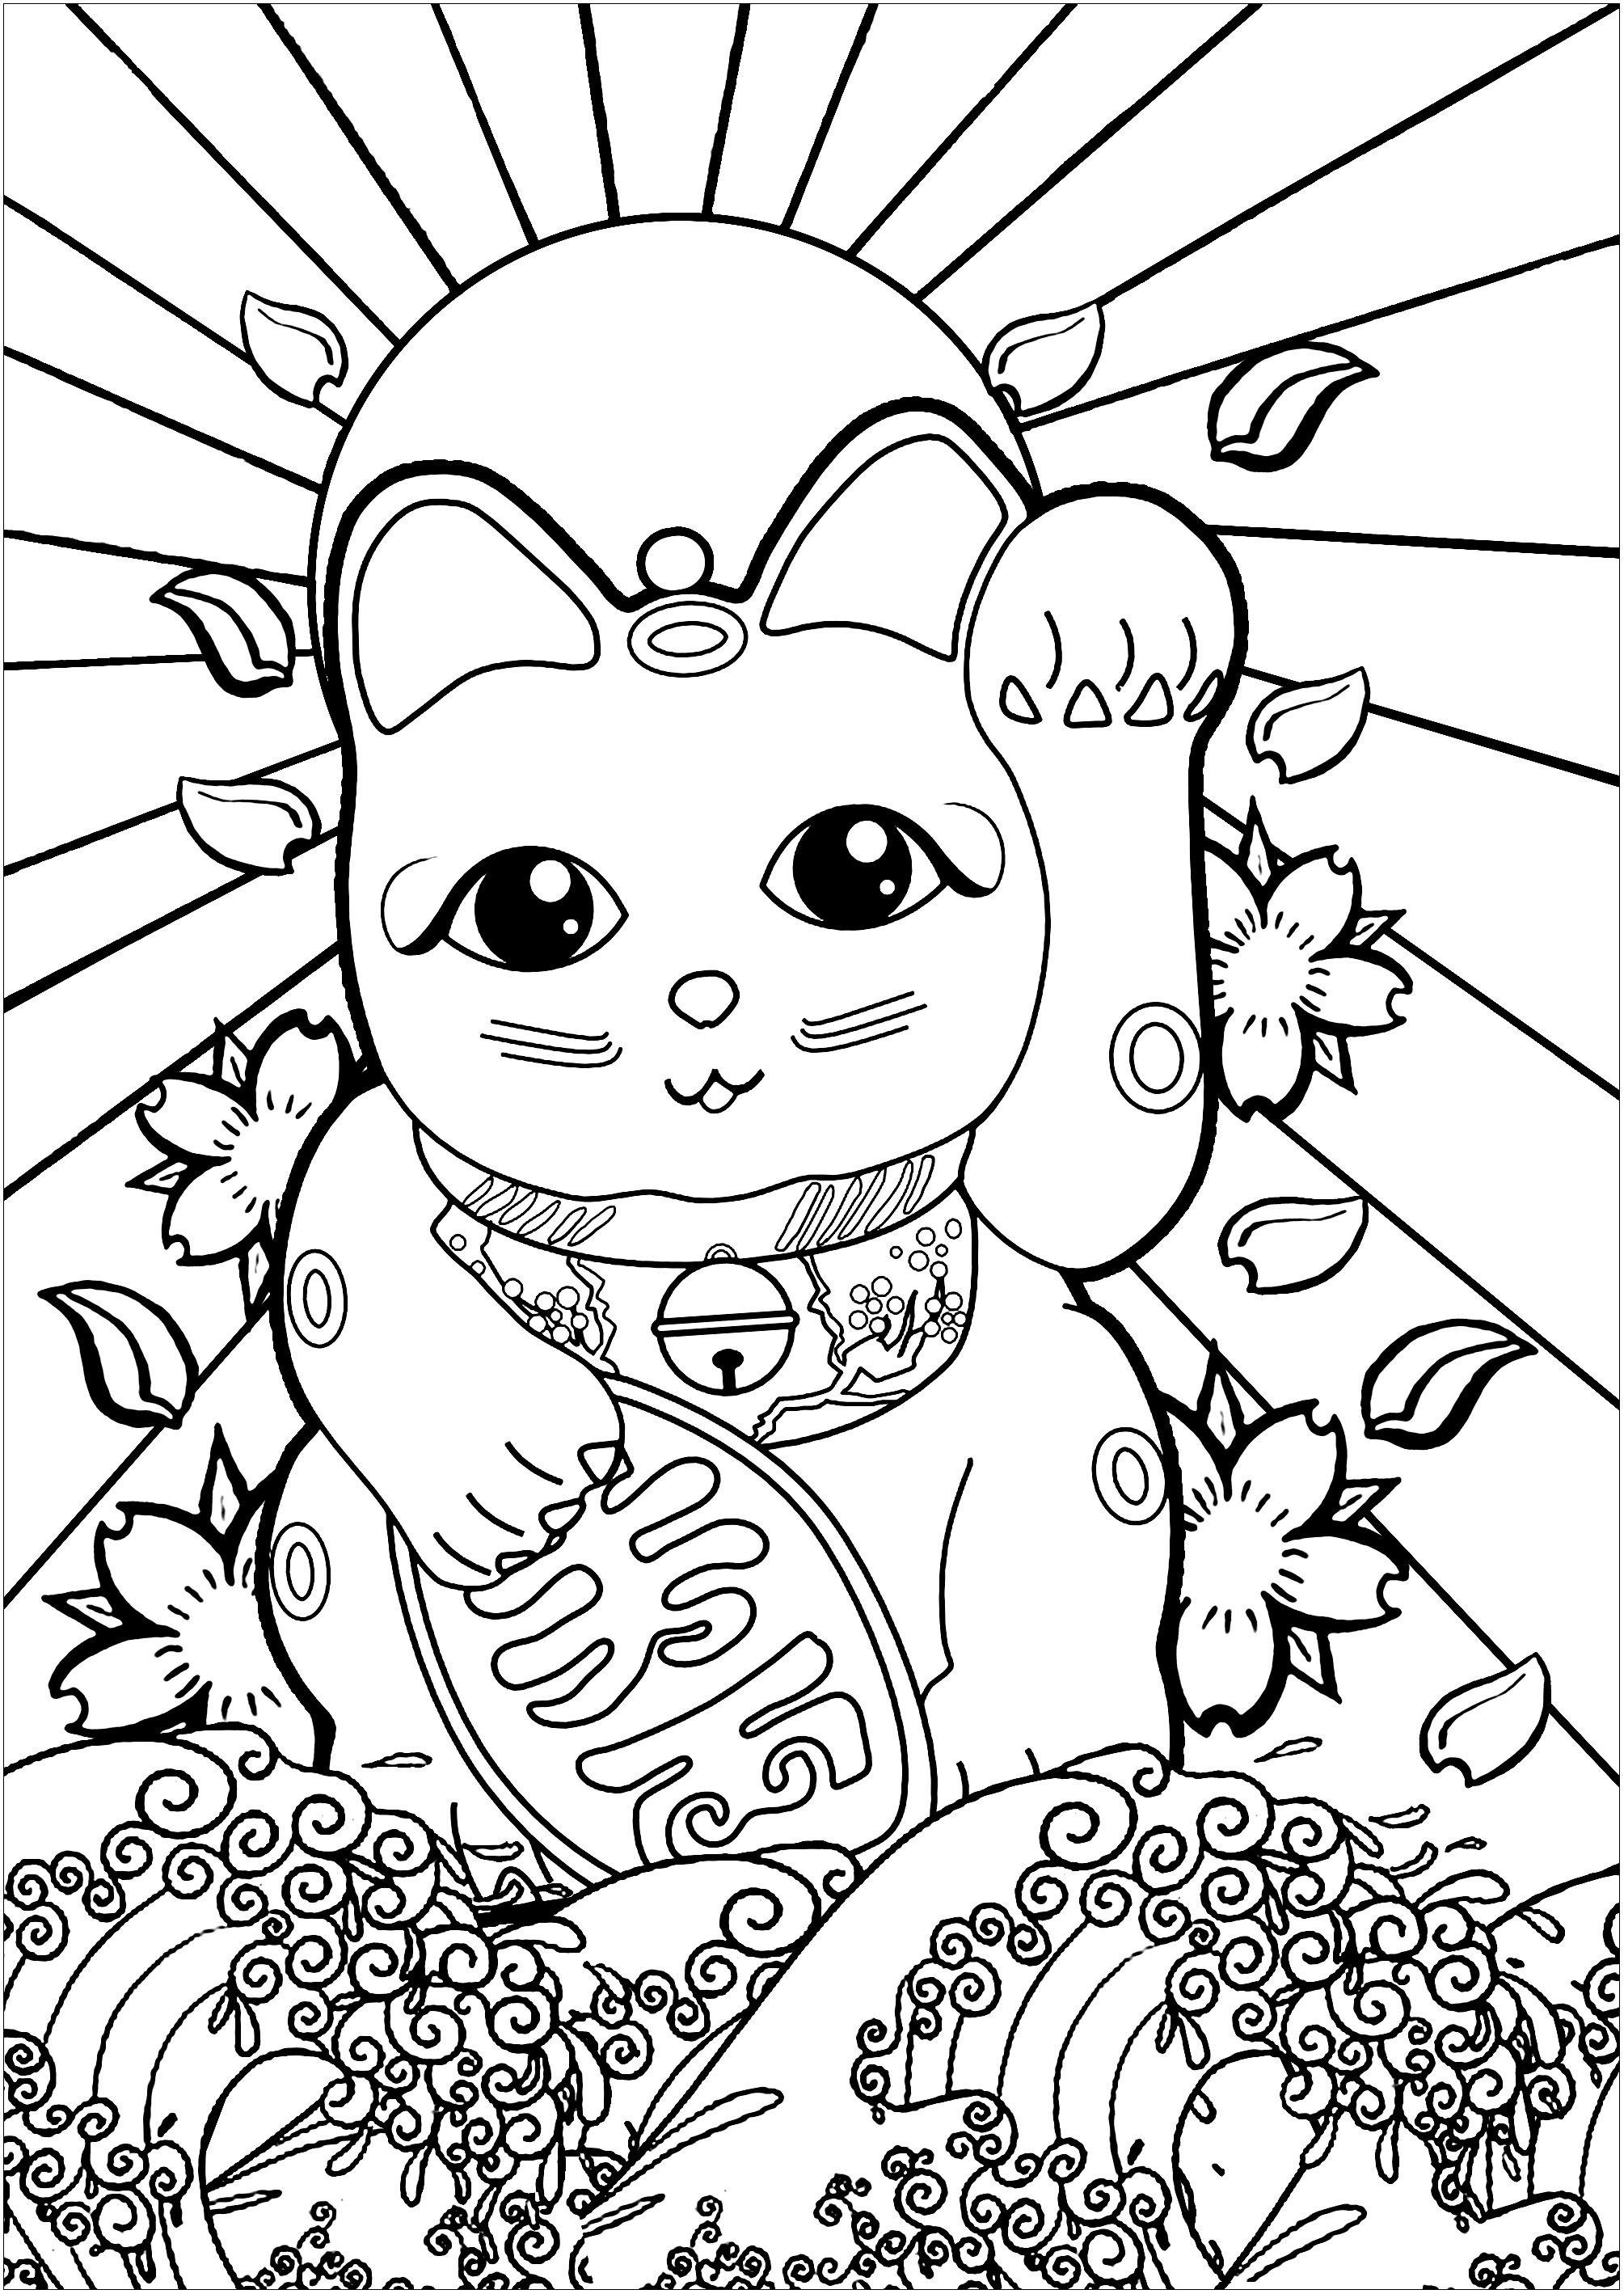 Maneki Neko and The Great Wave - Japan Adult Coloring Pages